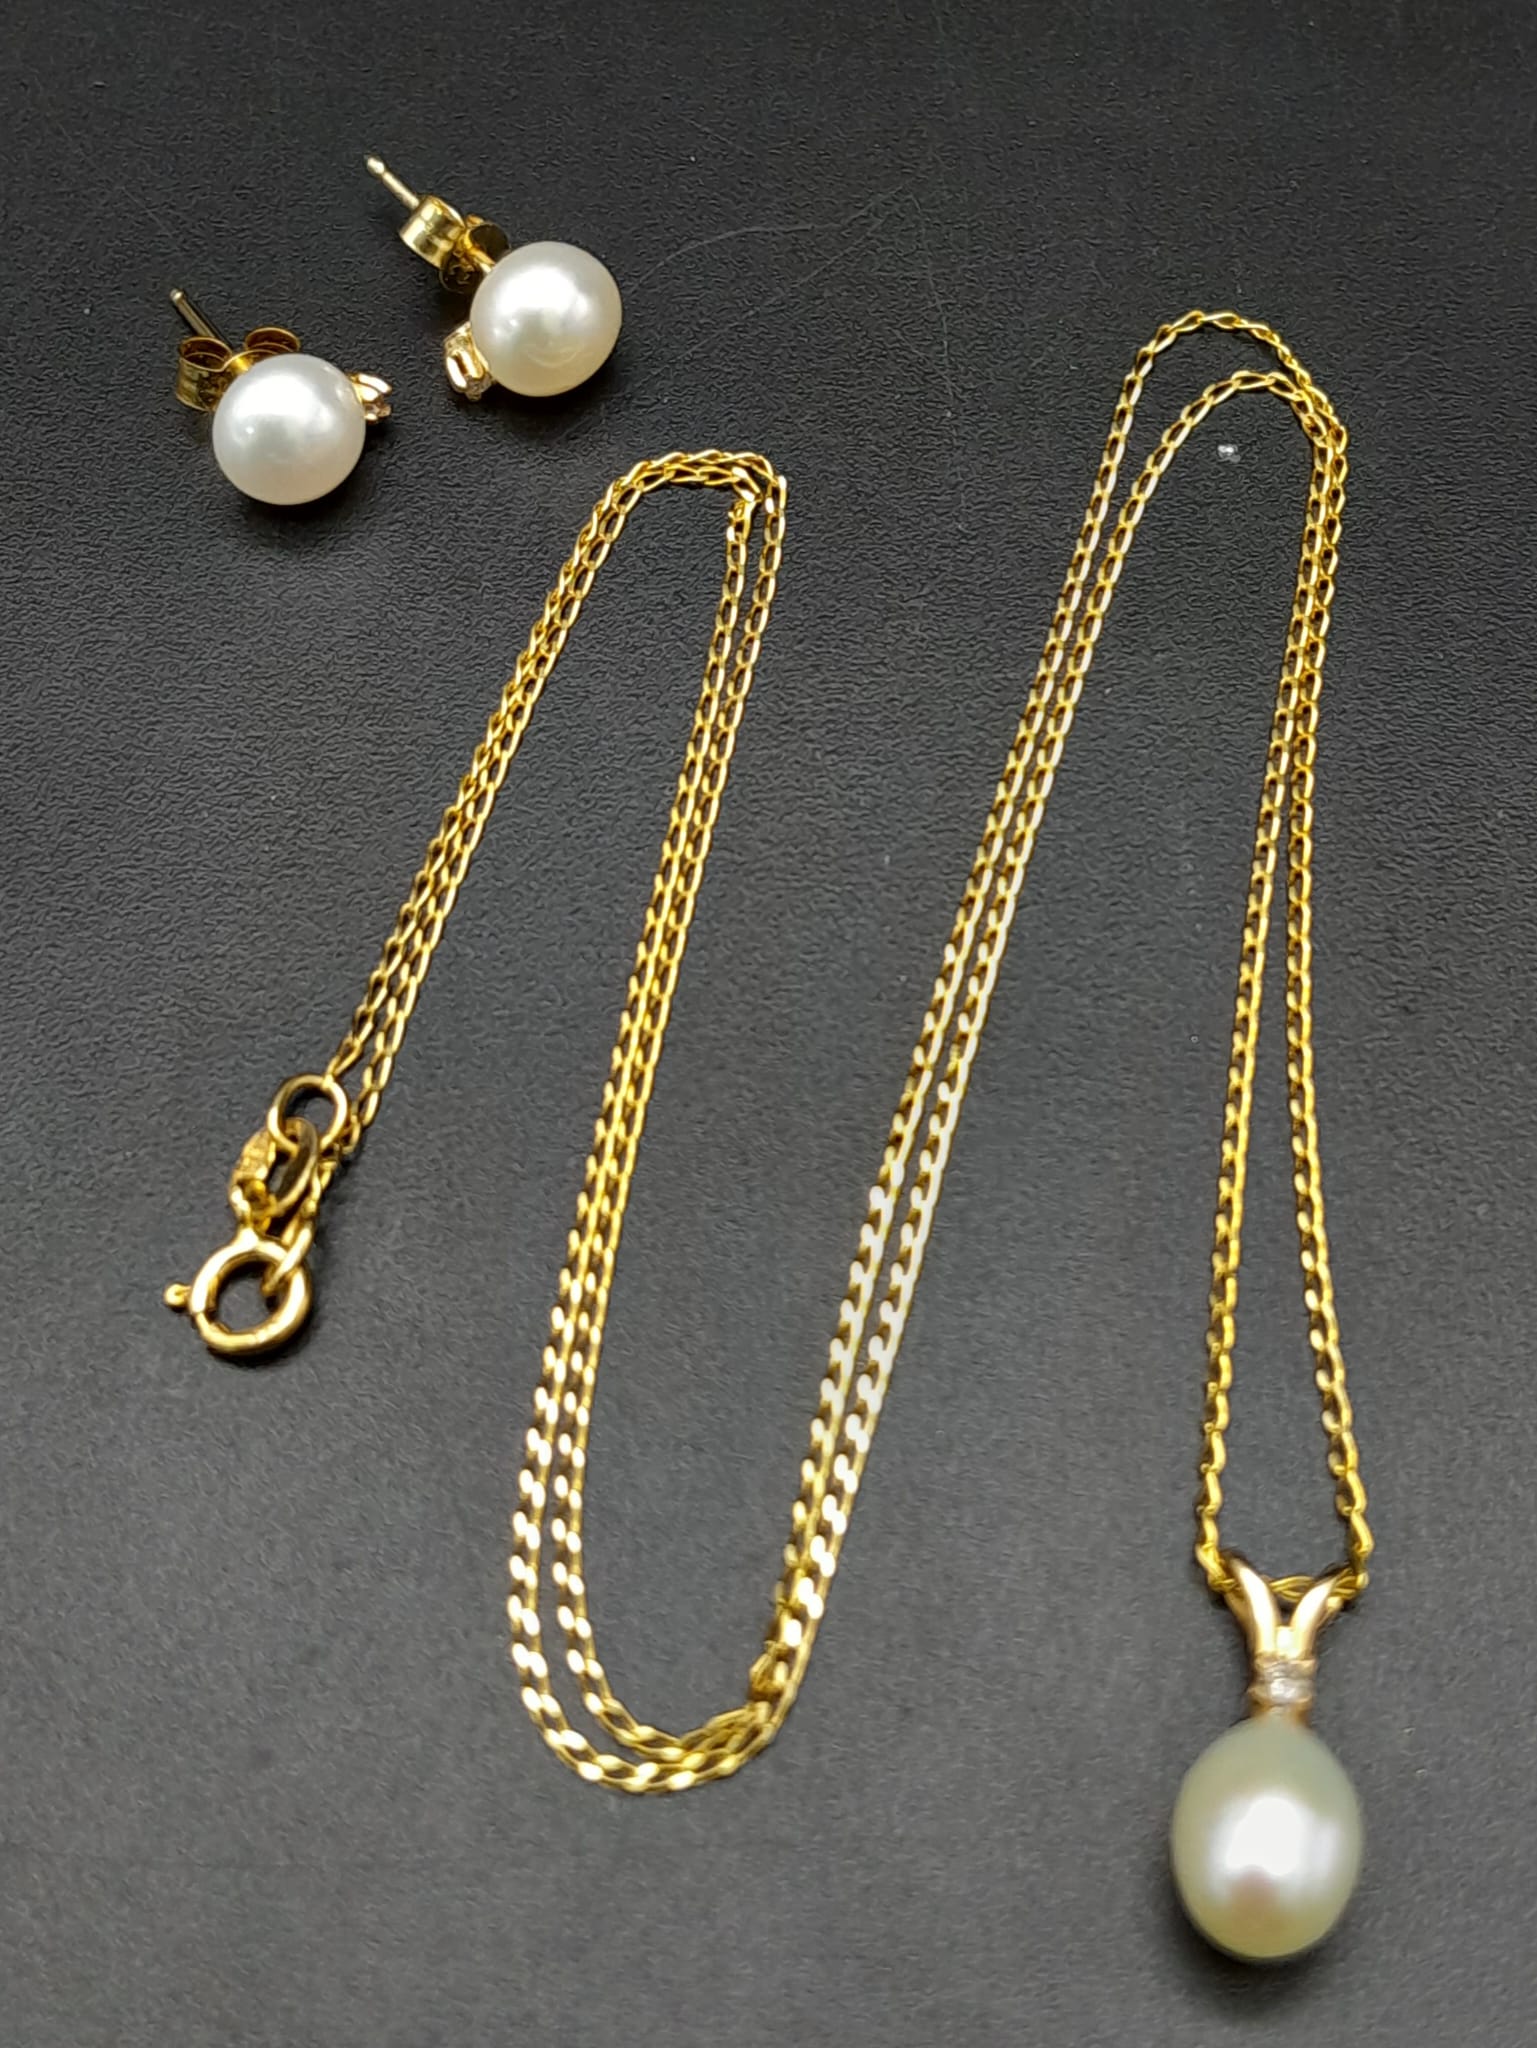 An Unworn 9 Carat Yellow Gold Pearl and Diamond Set Necklace & Matching Earrings. 46cm Length Chain, - Image 2 of 11